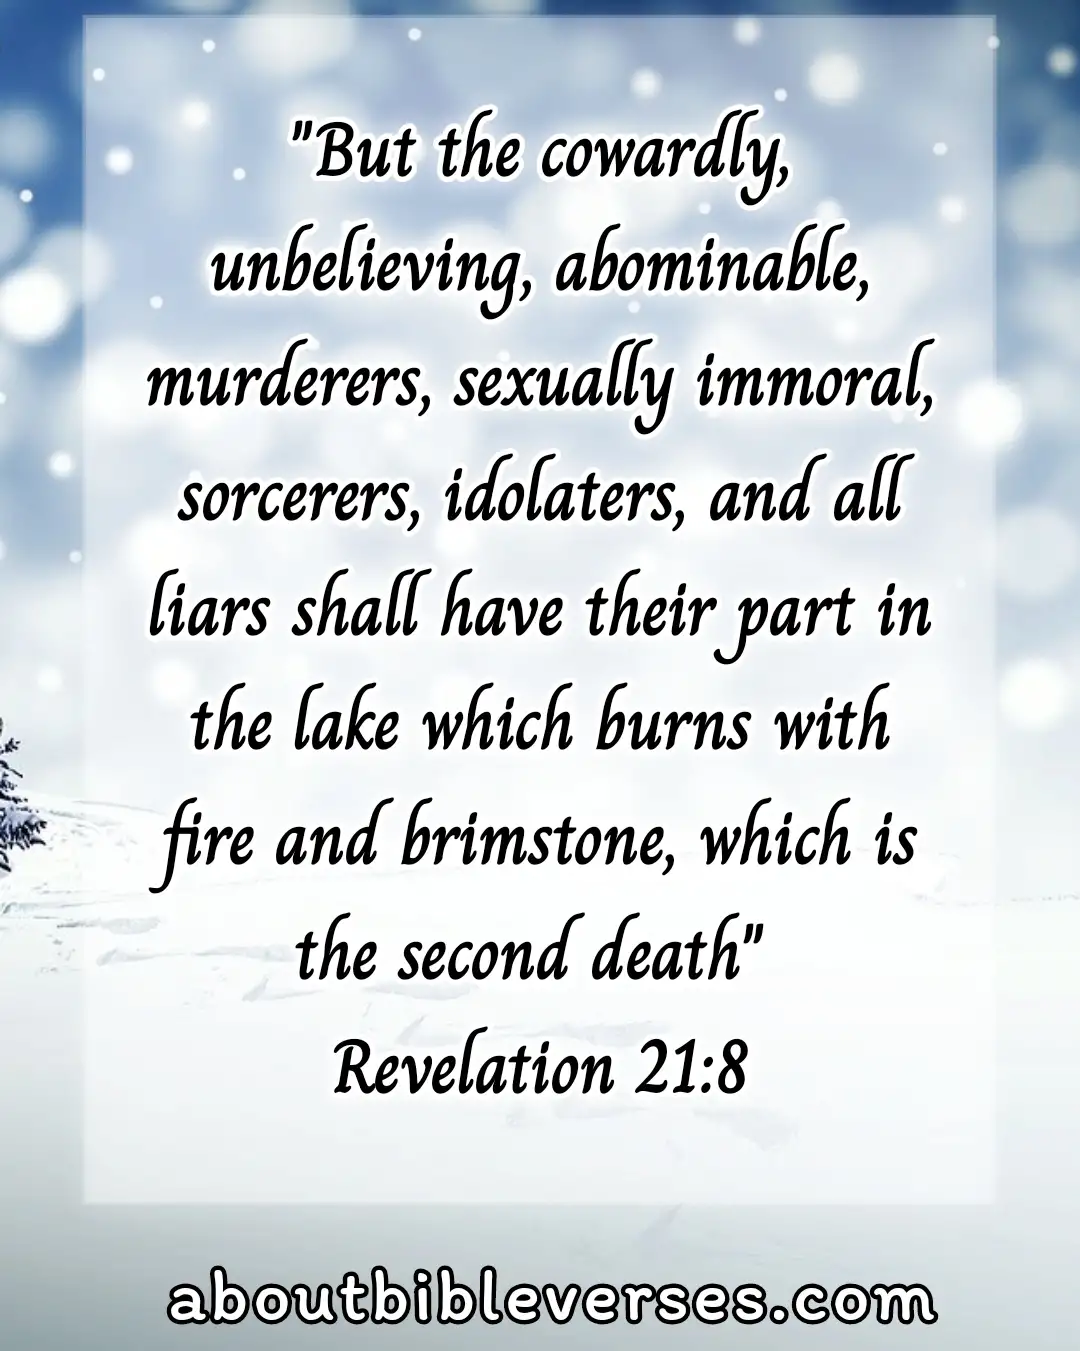 Bible Verses About Morality And Ethics (Revelation 21:8)